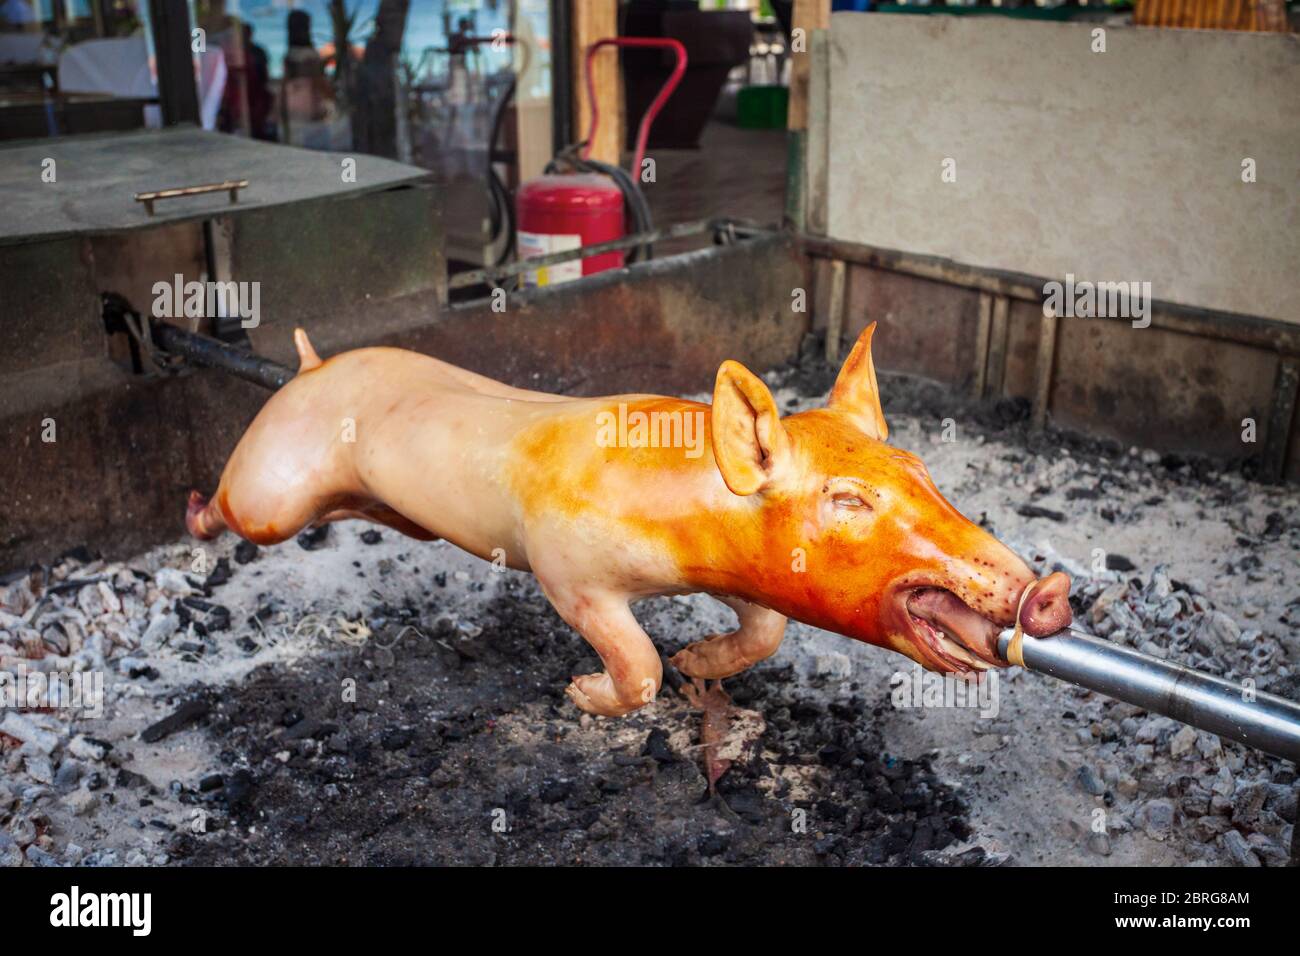 Suckling pig bbq roasted on a spit is a popular food in Philippines Stock Photo